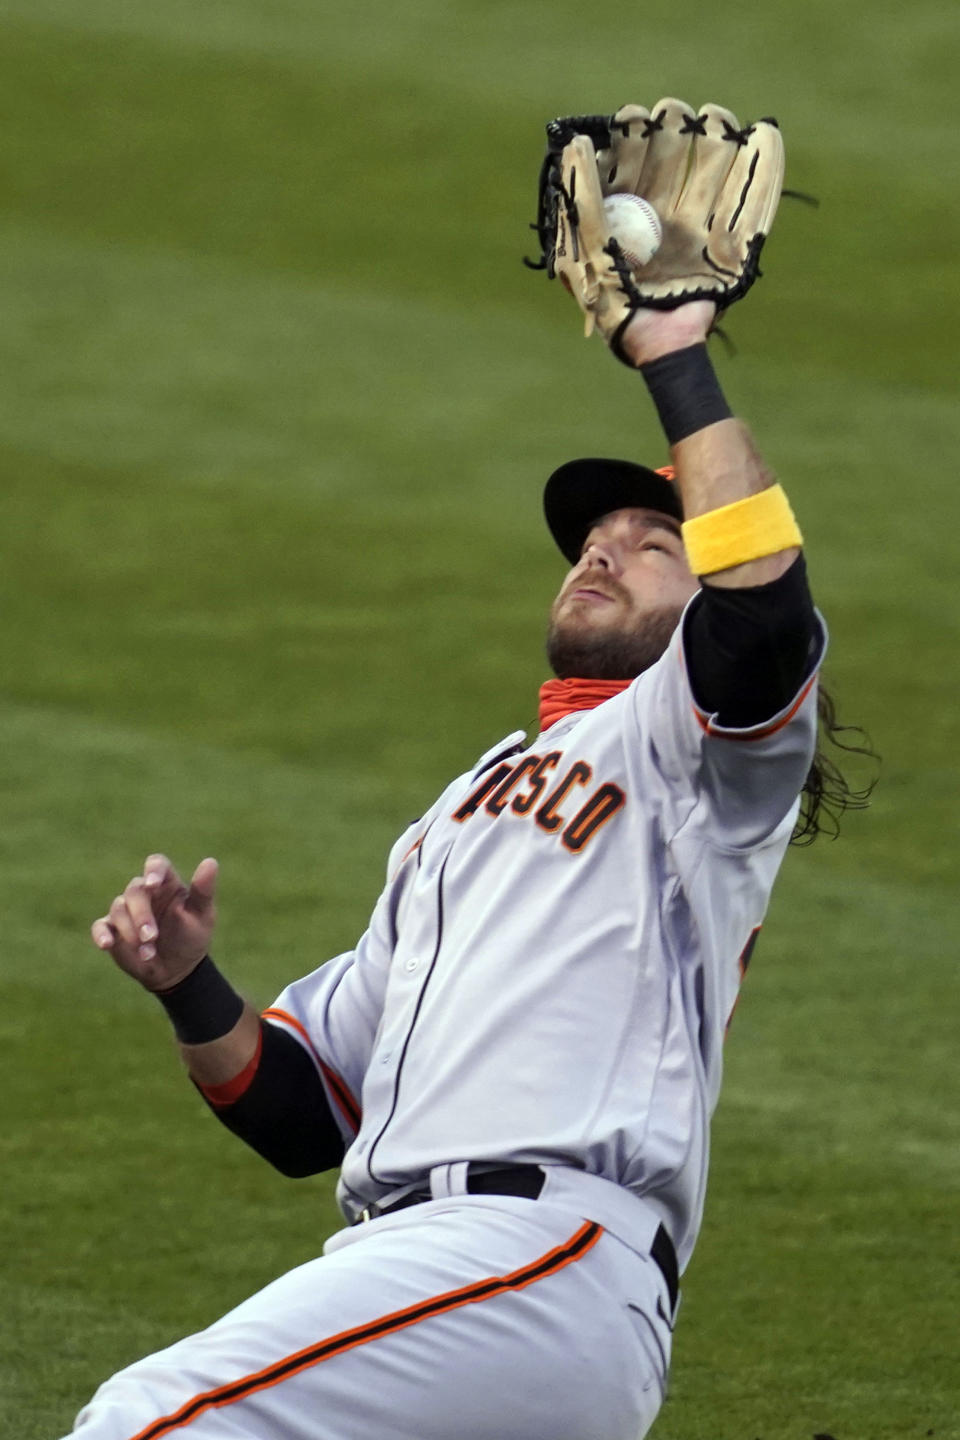 San Francisco Giants shortstop Brandon Crawford catches a foul ball hit by Oakland Athletics' Tommy La Stella in the first inning of a baseball game Friday, Sept. 18, 2020, in Oakland, Calif. (AP Photo/Eric Risberg)